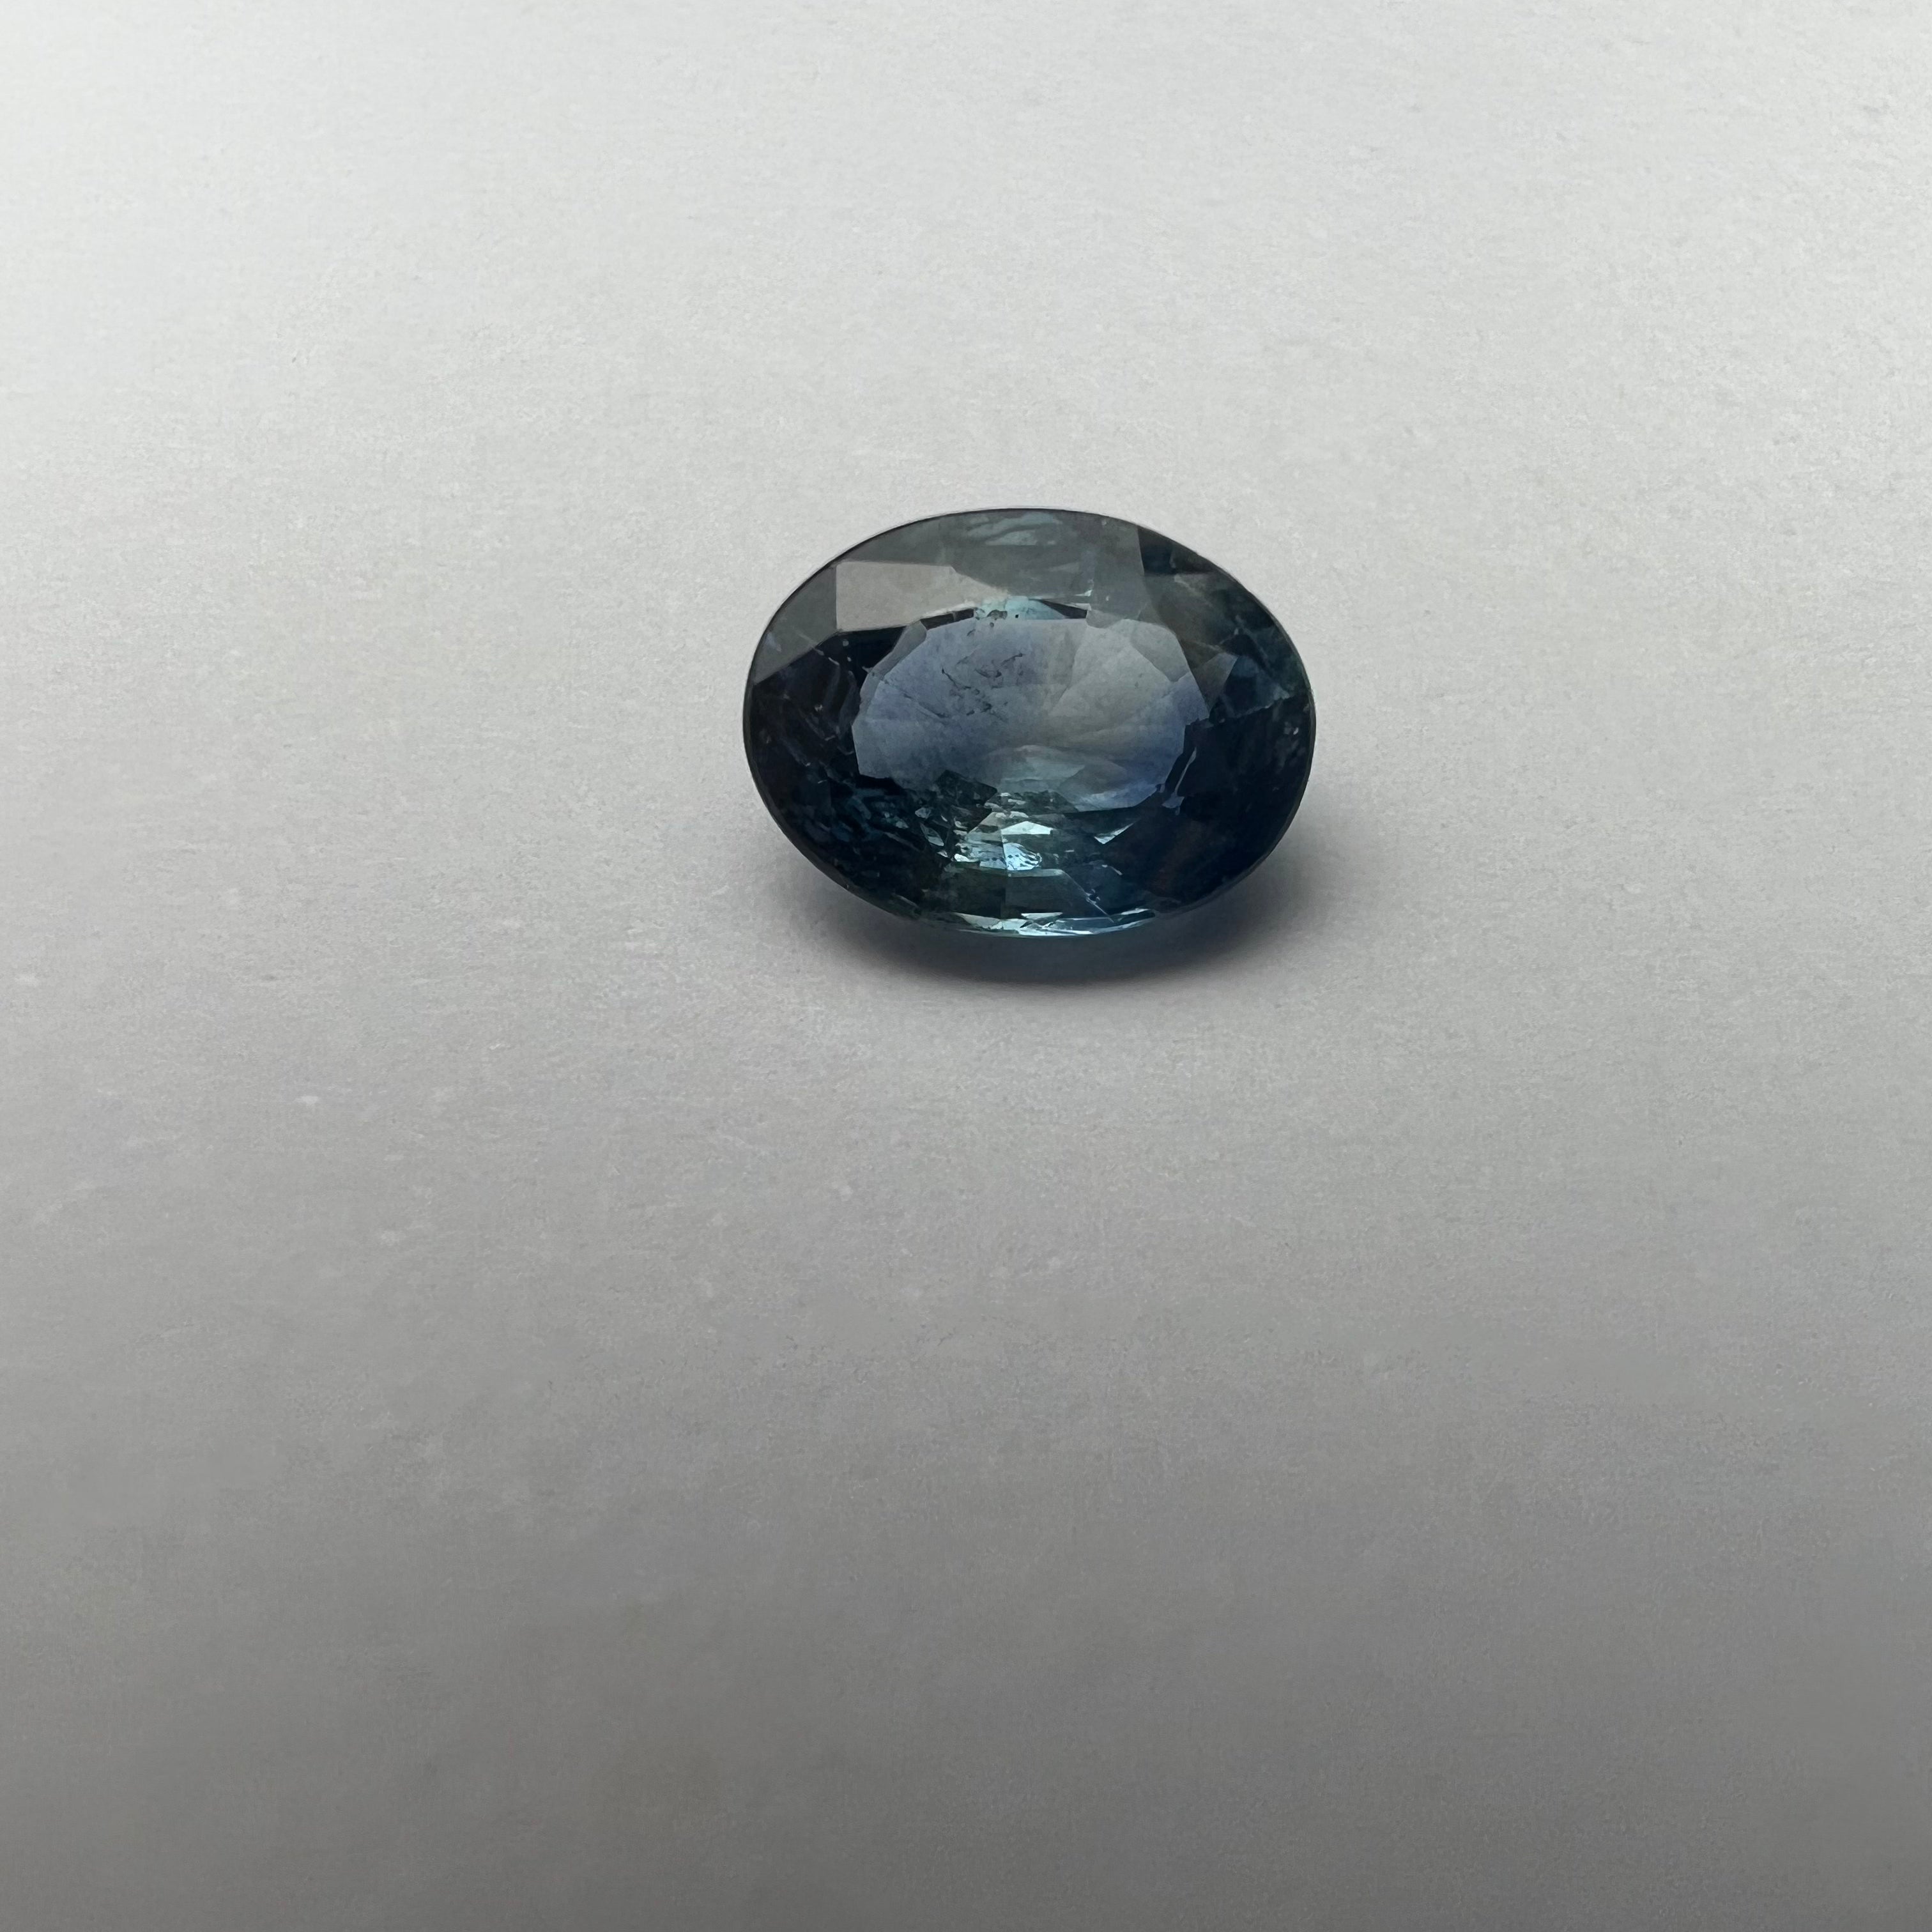 1.35CTW Loose Oval Sapphire 7.38x5.2x4mm Earth mined Gemstone